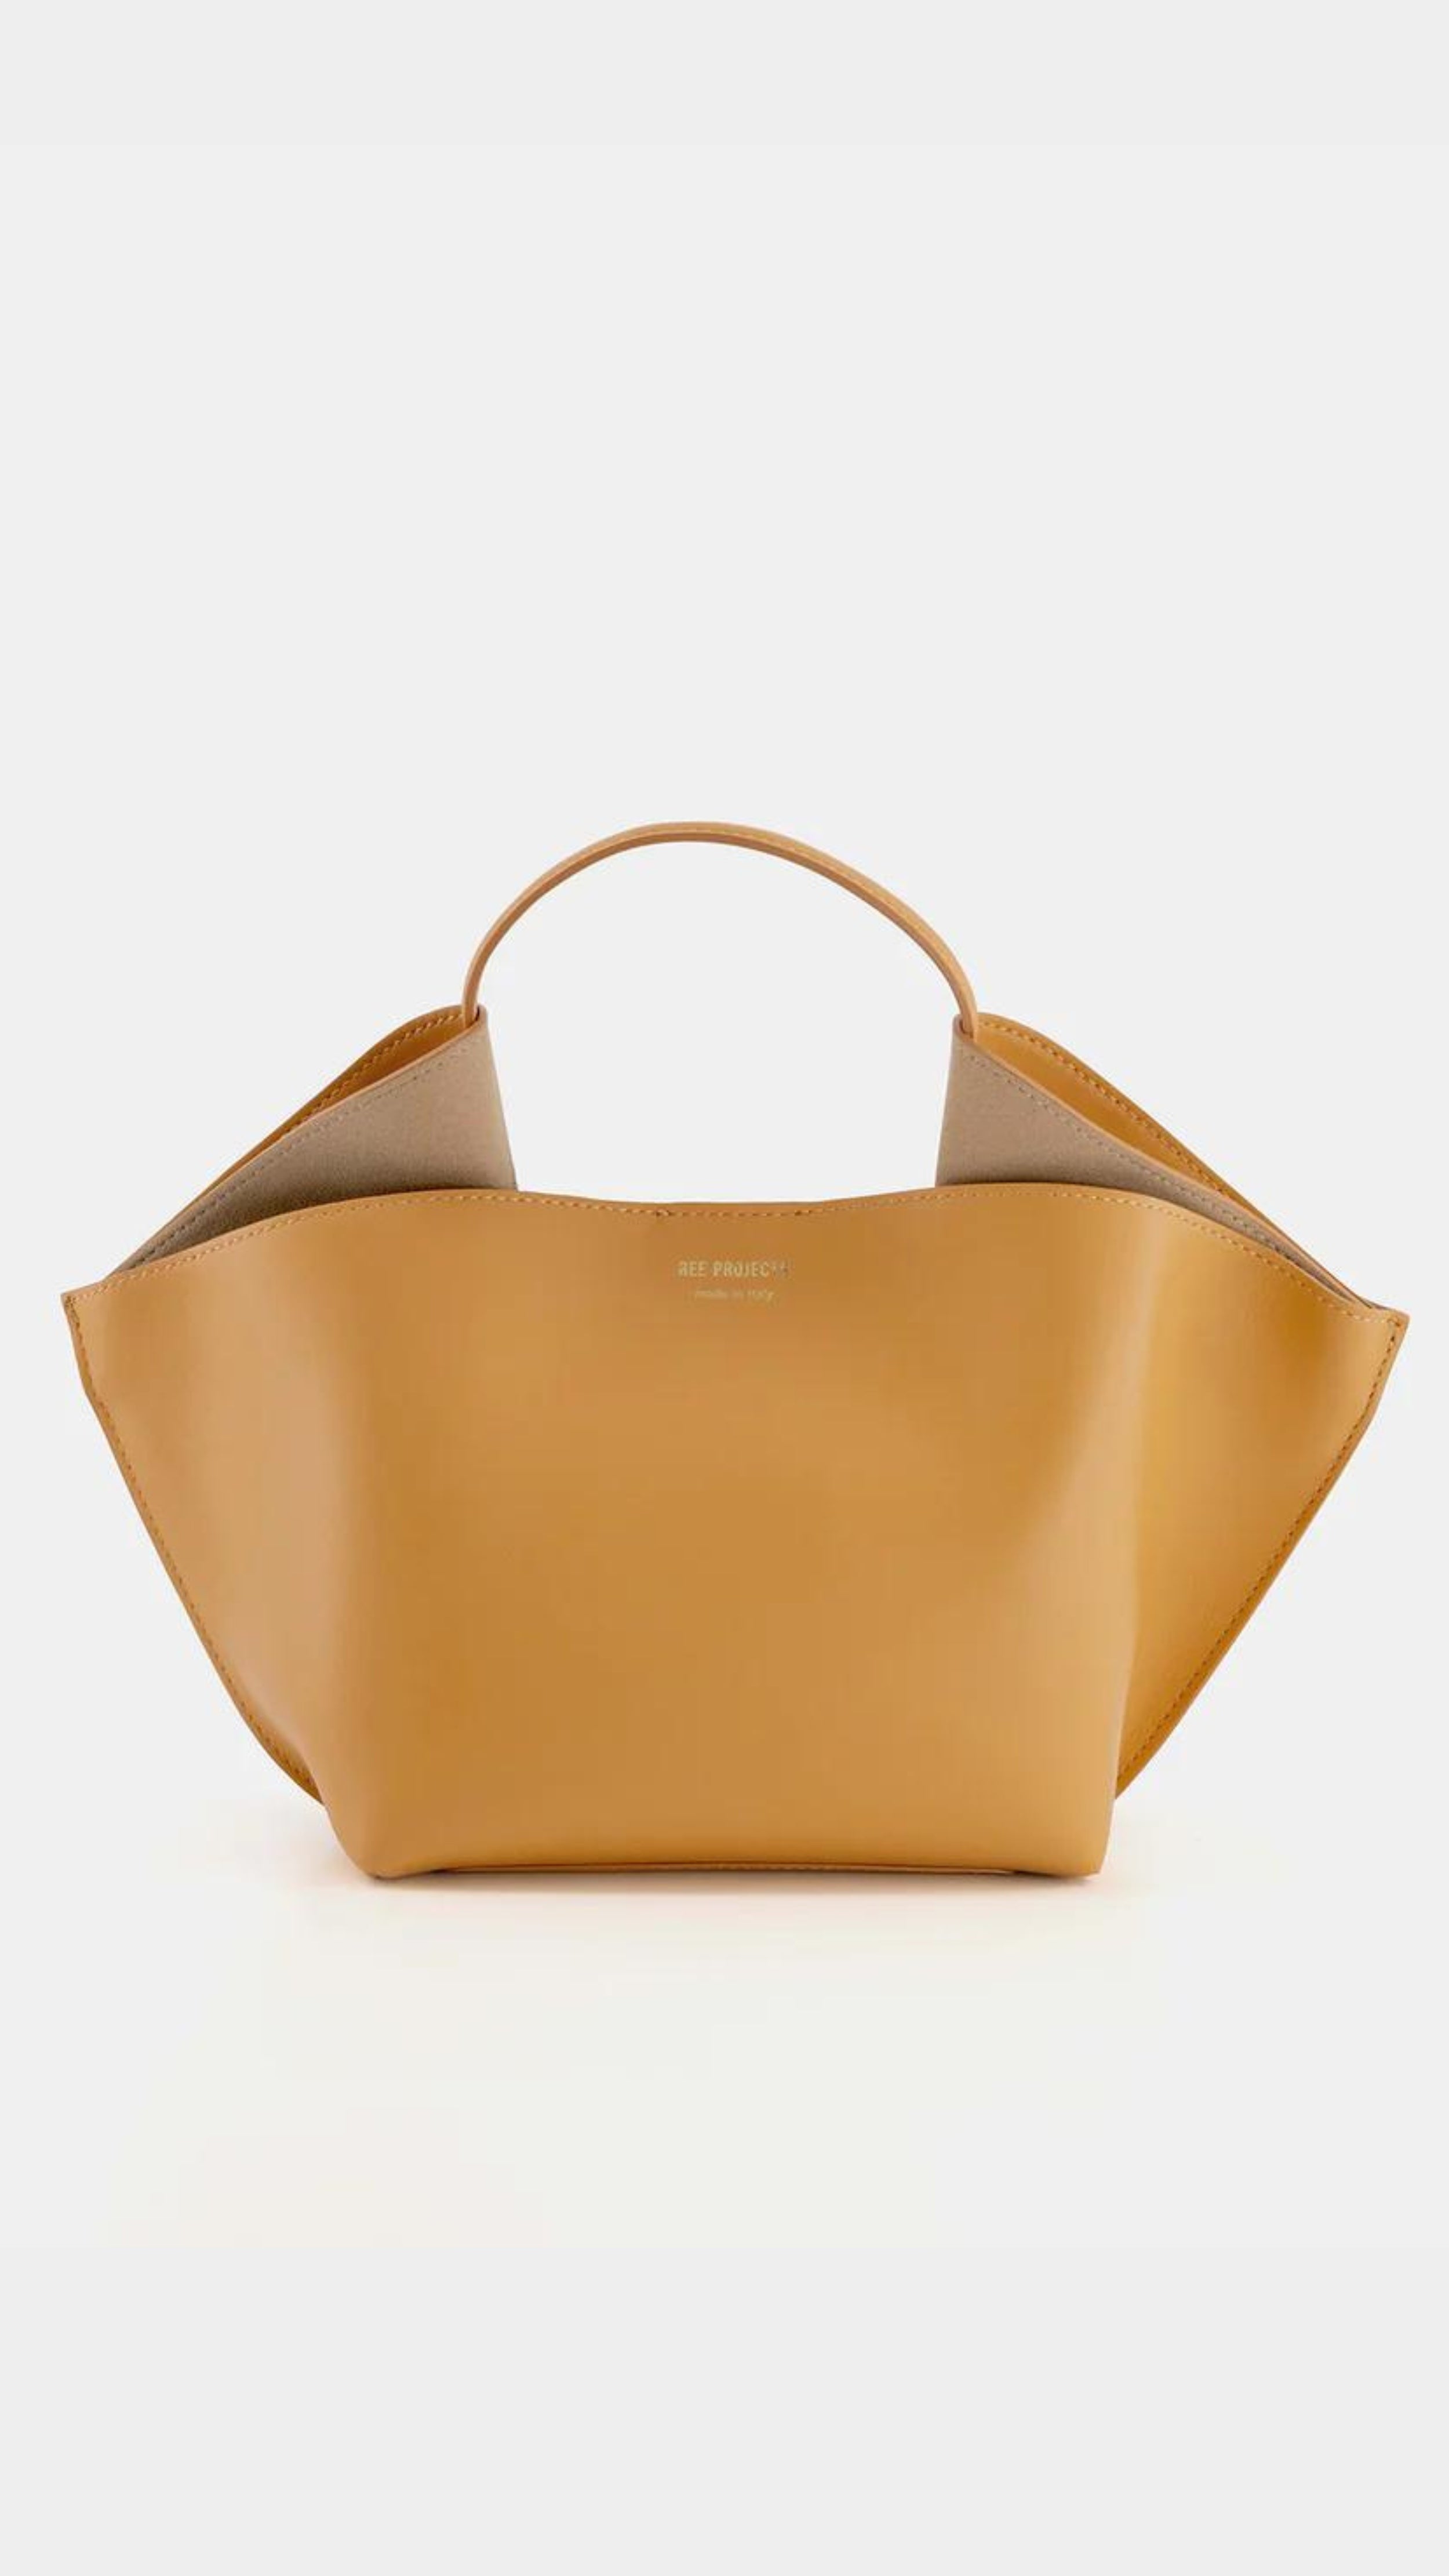 Ree Projects, Anne Tote Mini in Apricot.  An understated elegant every day bag. Crafted from the softest Italian calf leather, this apricot orange  purse features the signature folded &#39;Ree Projects top-line gussets&#39; and a sculptural silhouette. Its mini-sized size easily fits your phone, tablet and other items. This purse can be used with the top handle or as a crossbody. It features interior pockets and a magnet snap closure.  Shown from the front view.